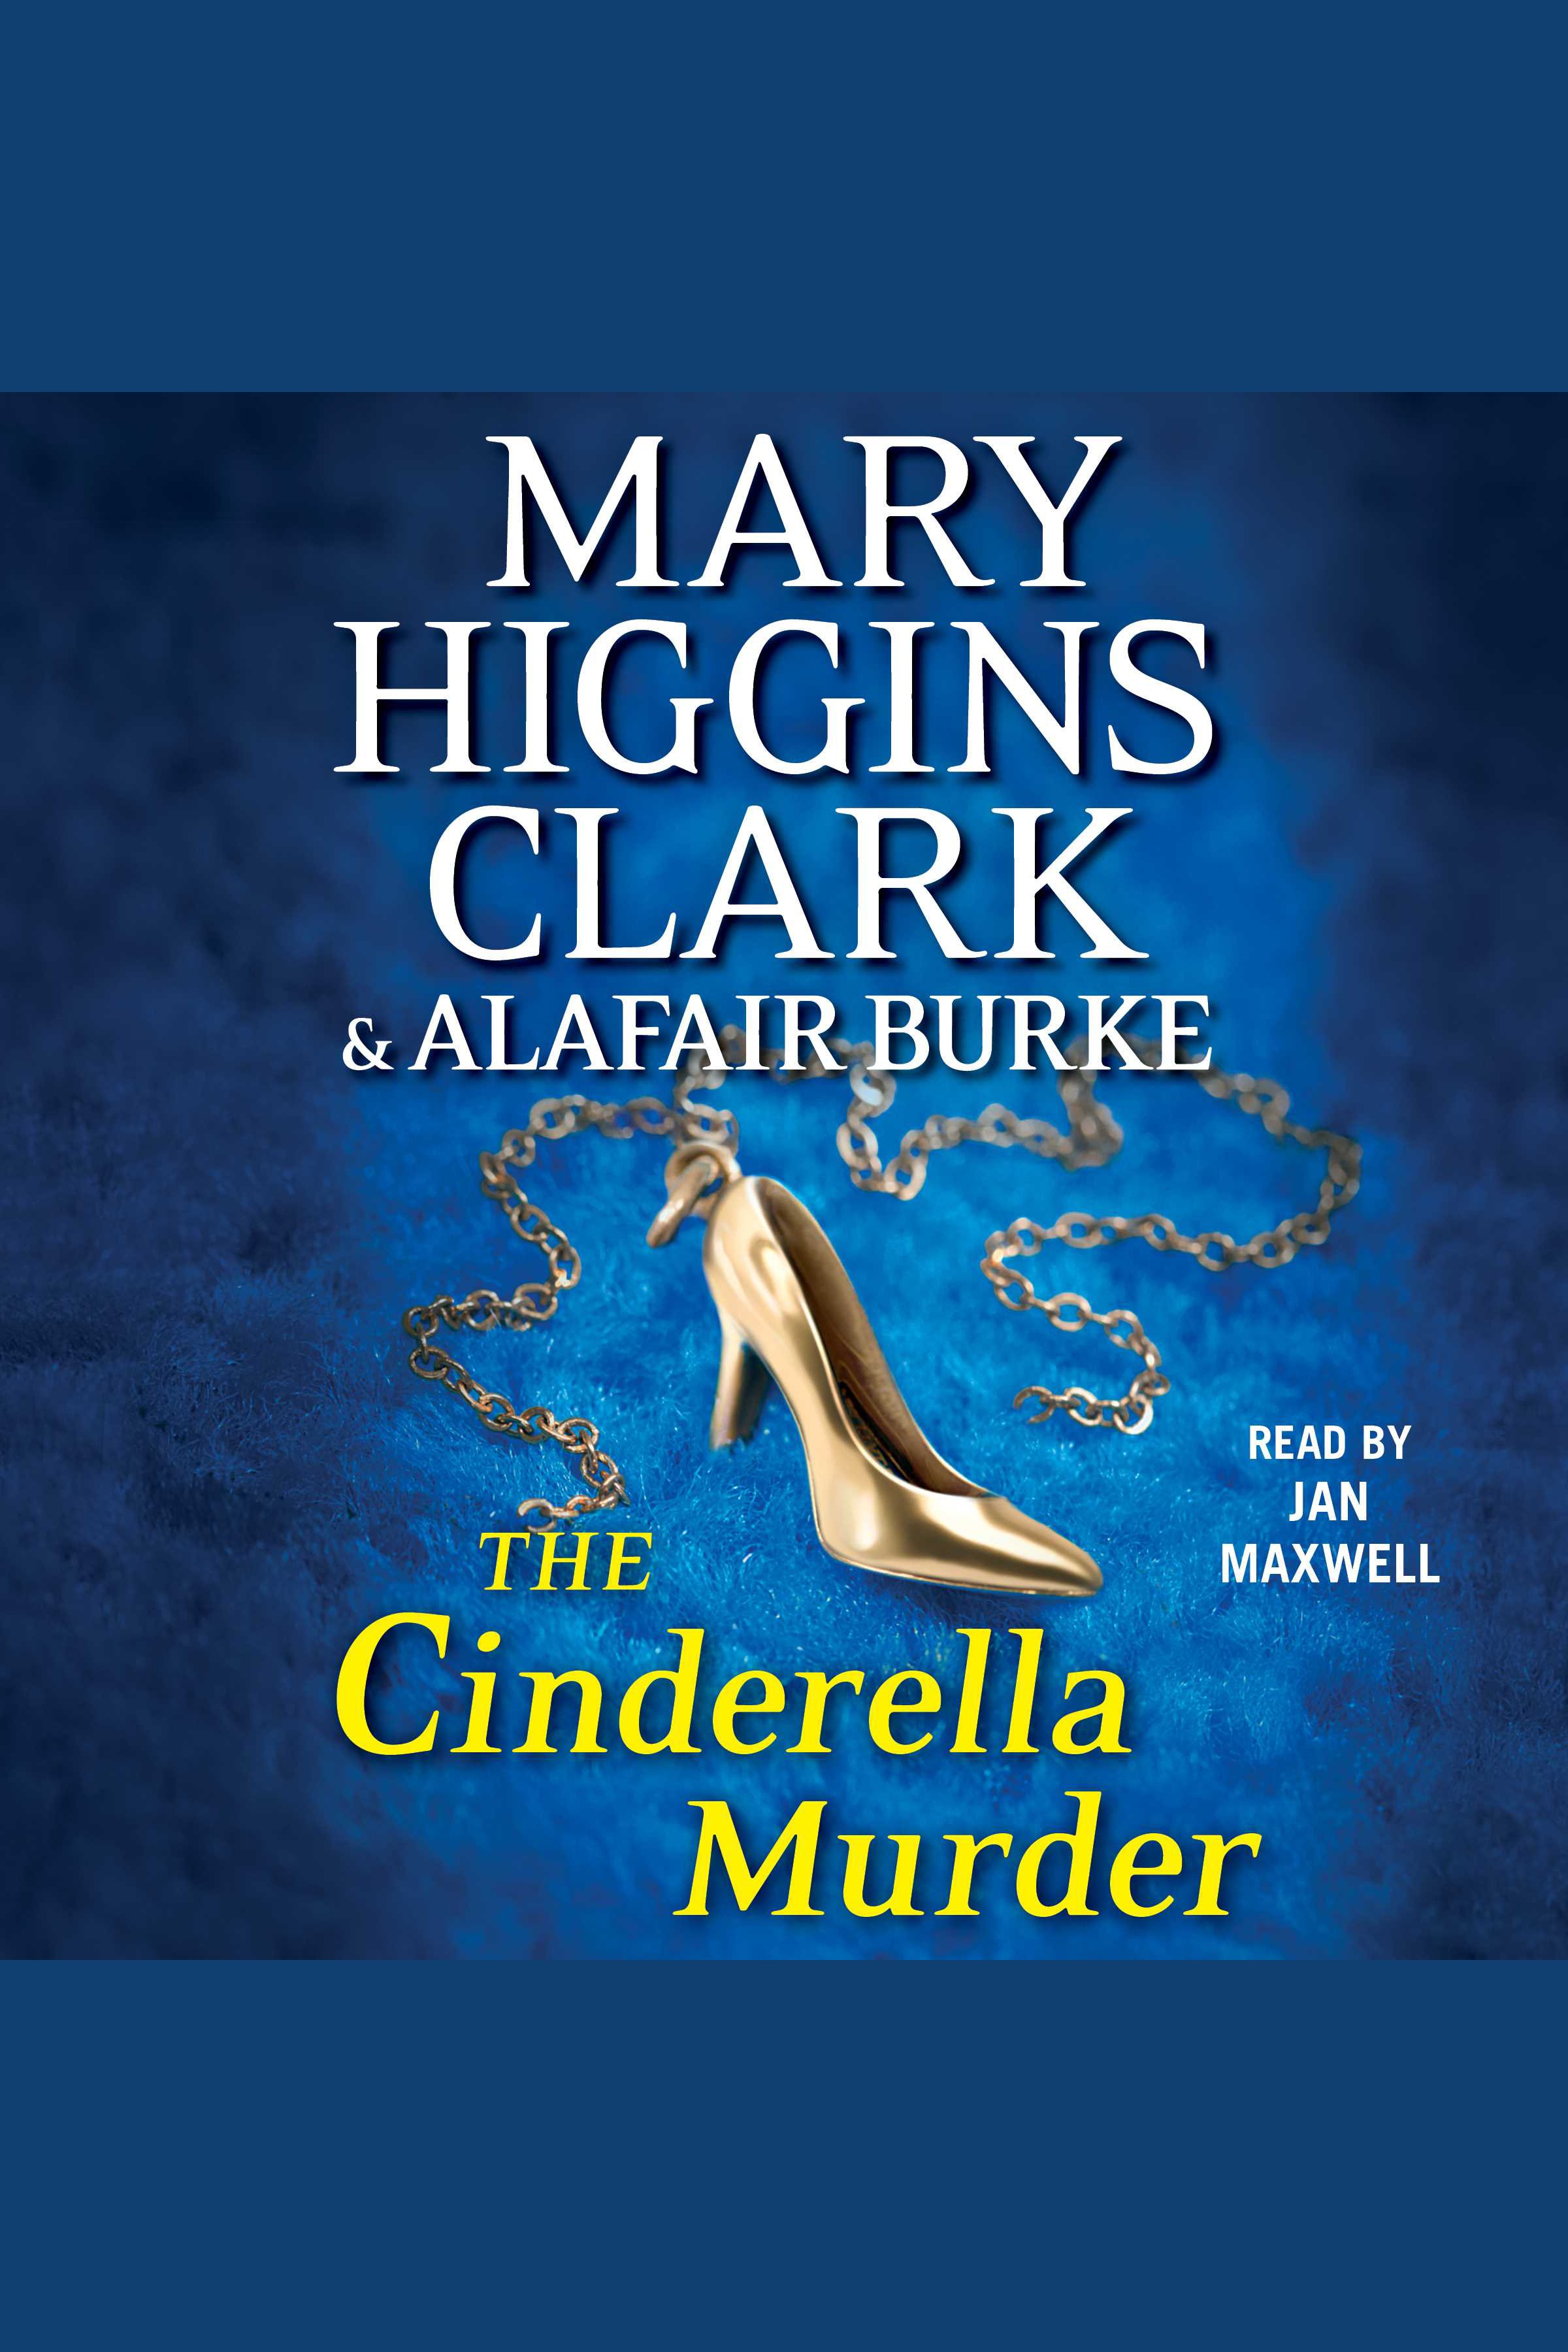 The Cinderella murder cover image